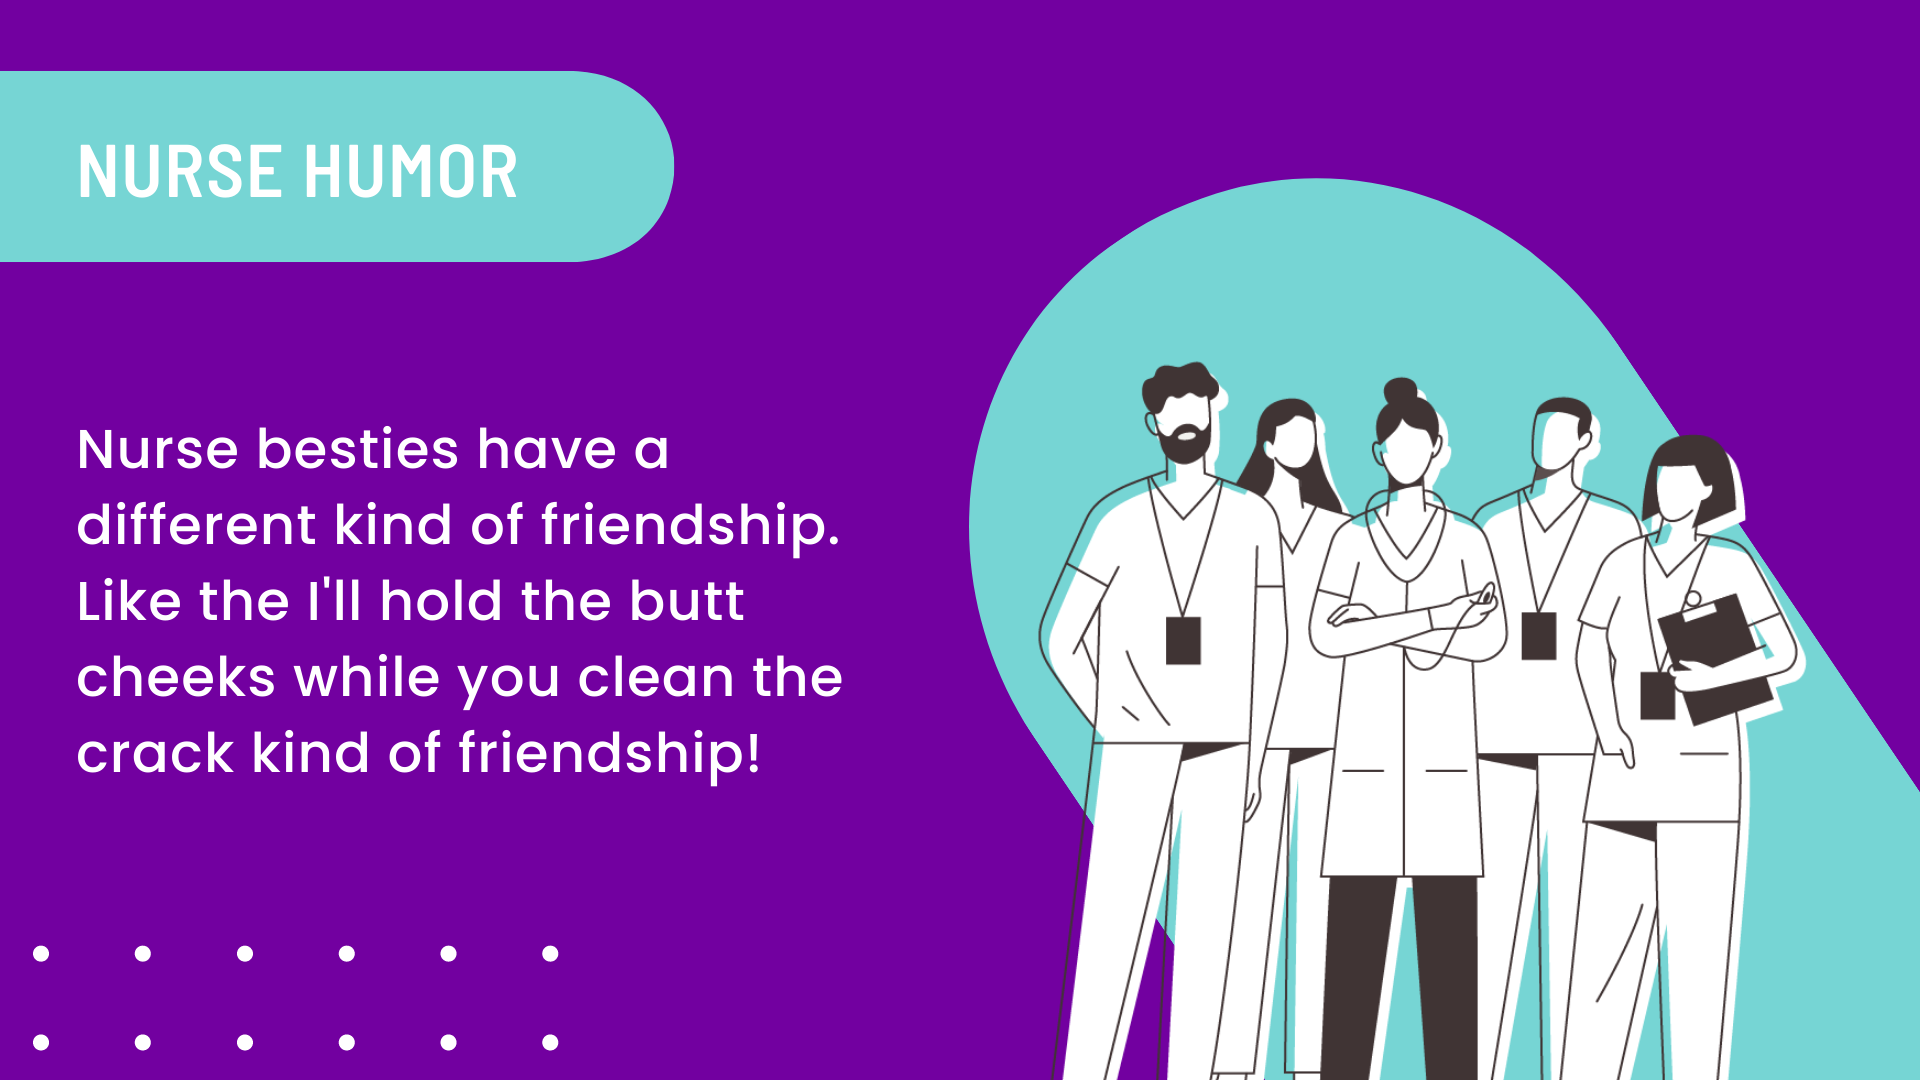 An illustration that explains how nurse besties have a different kind of friendship.